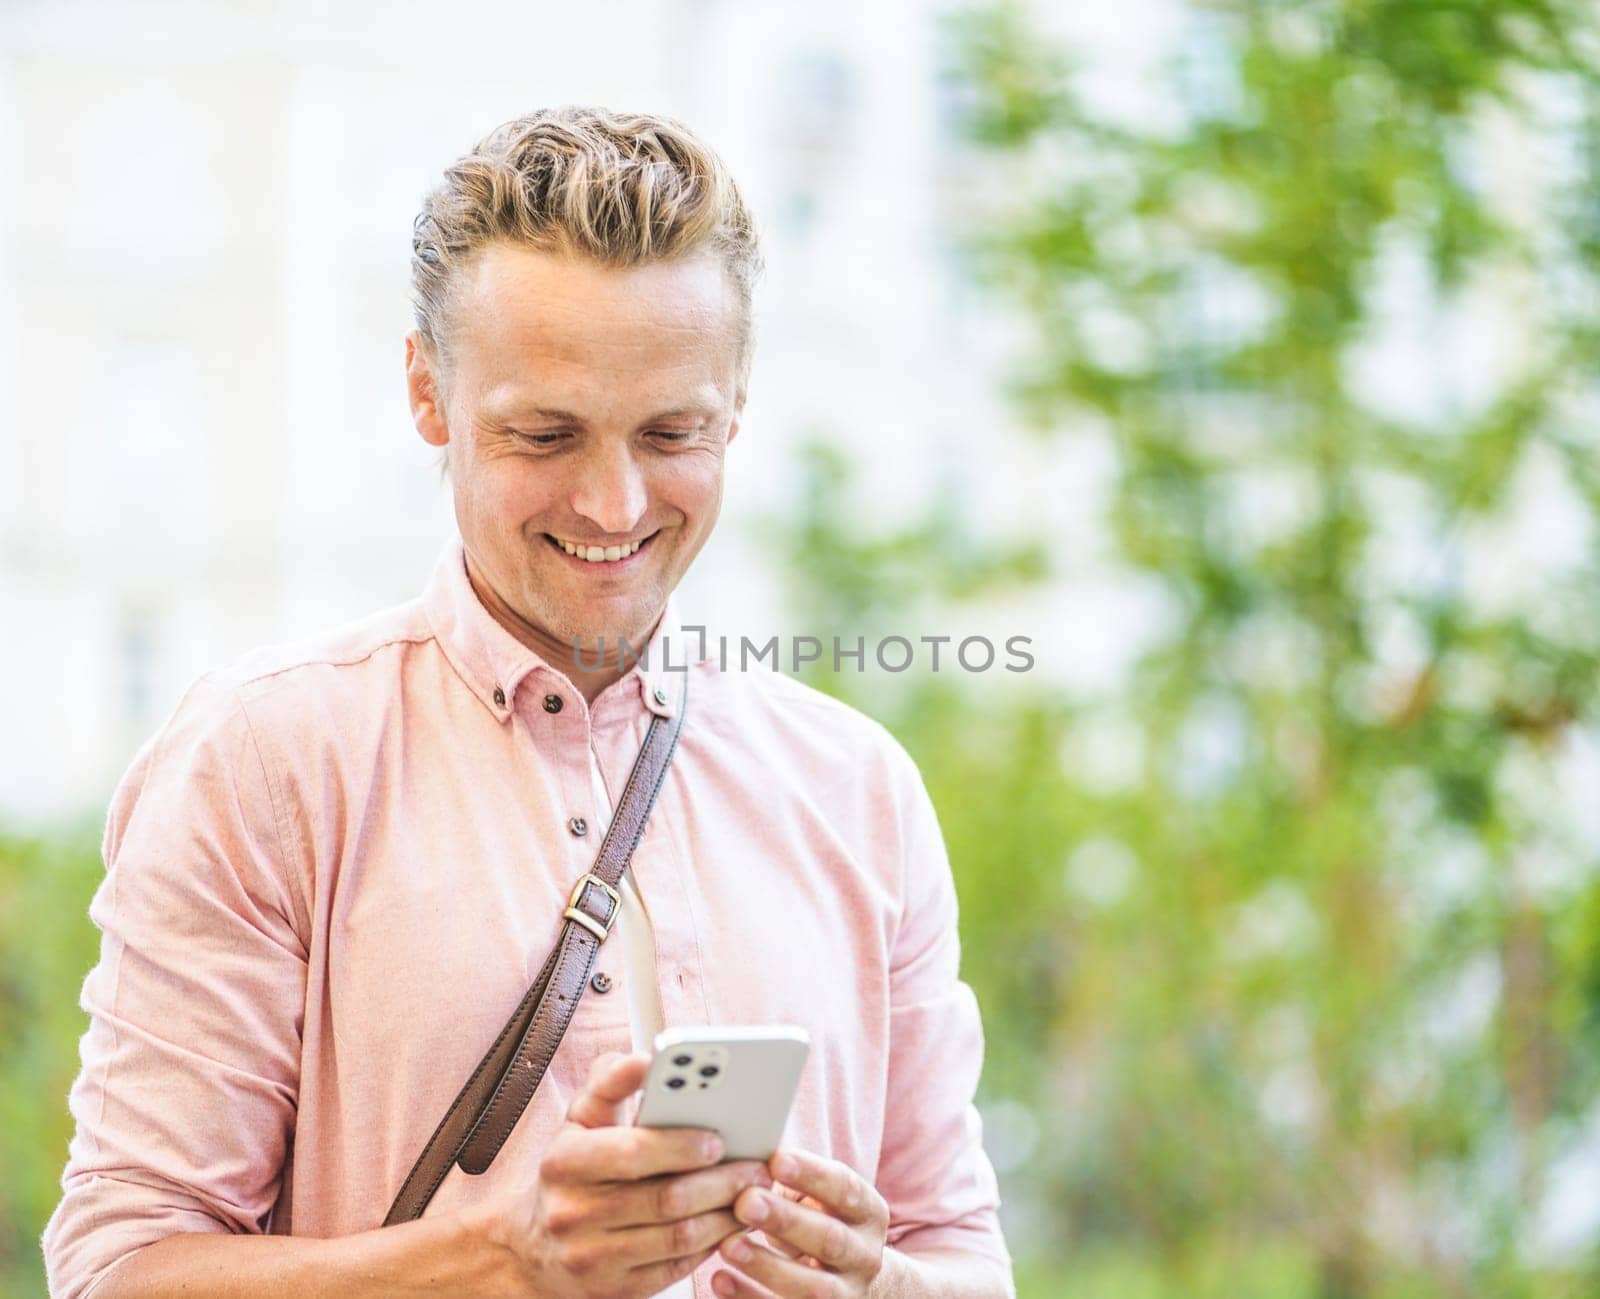 Happy man texting message on phone while standing across street in urban city. Concept of easy communication in urban setting. Man's expression reflects happiness while engaging in effortless messaging. High quality photo